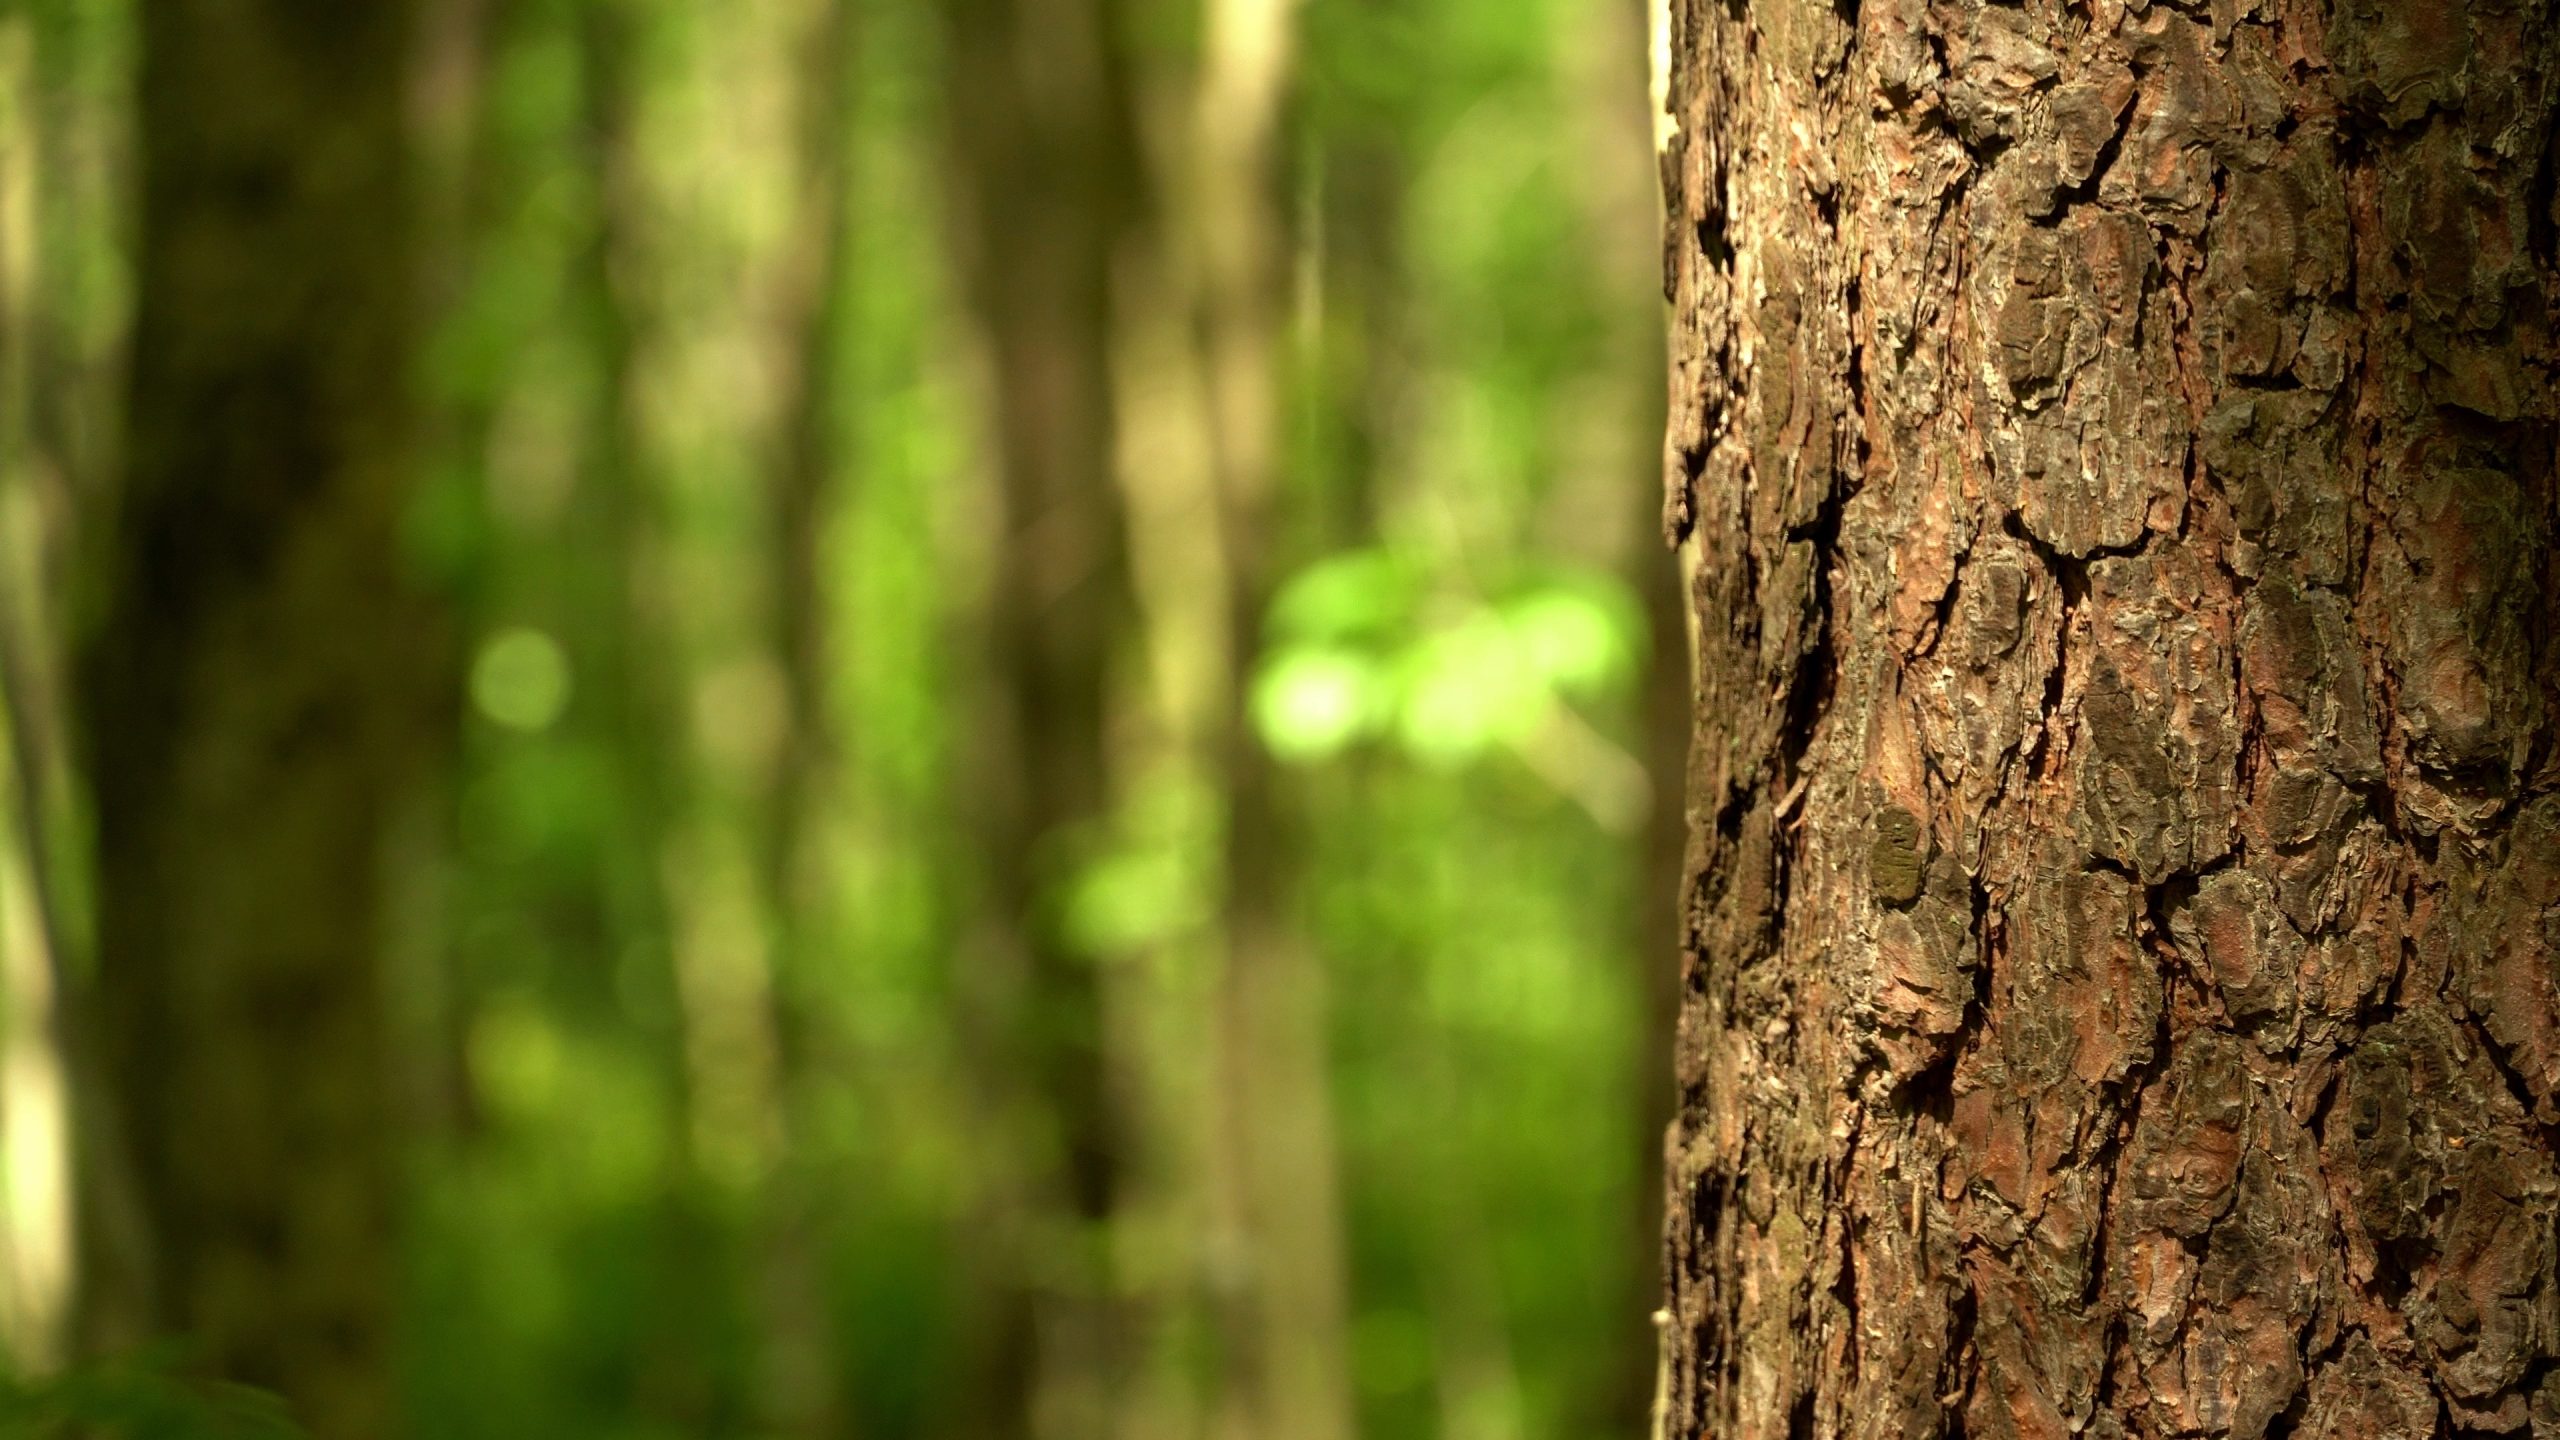 Green nature bokeh background with tree trunk closeup in 4k - Stock Video |  ForceLabs